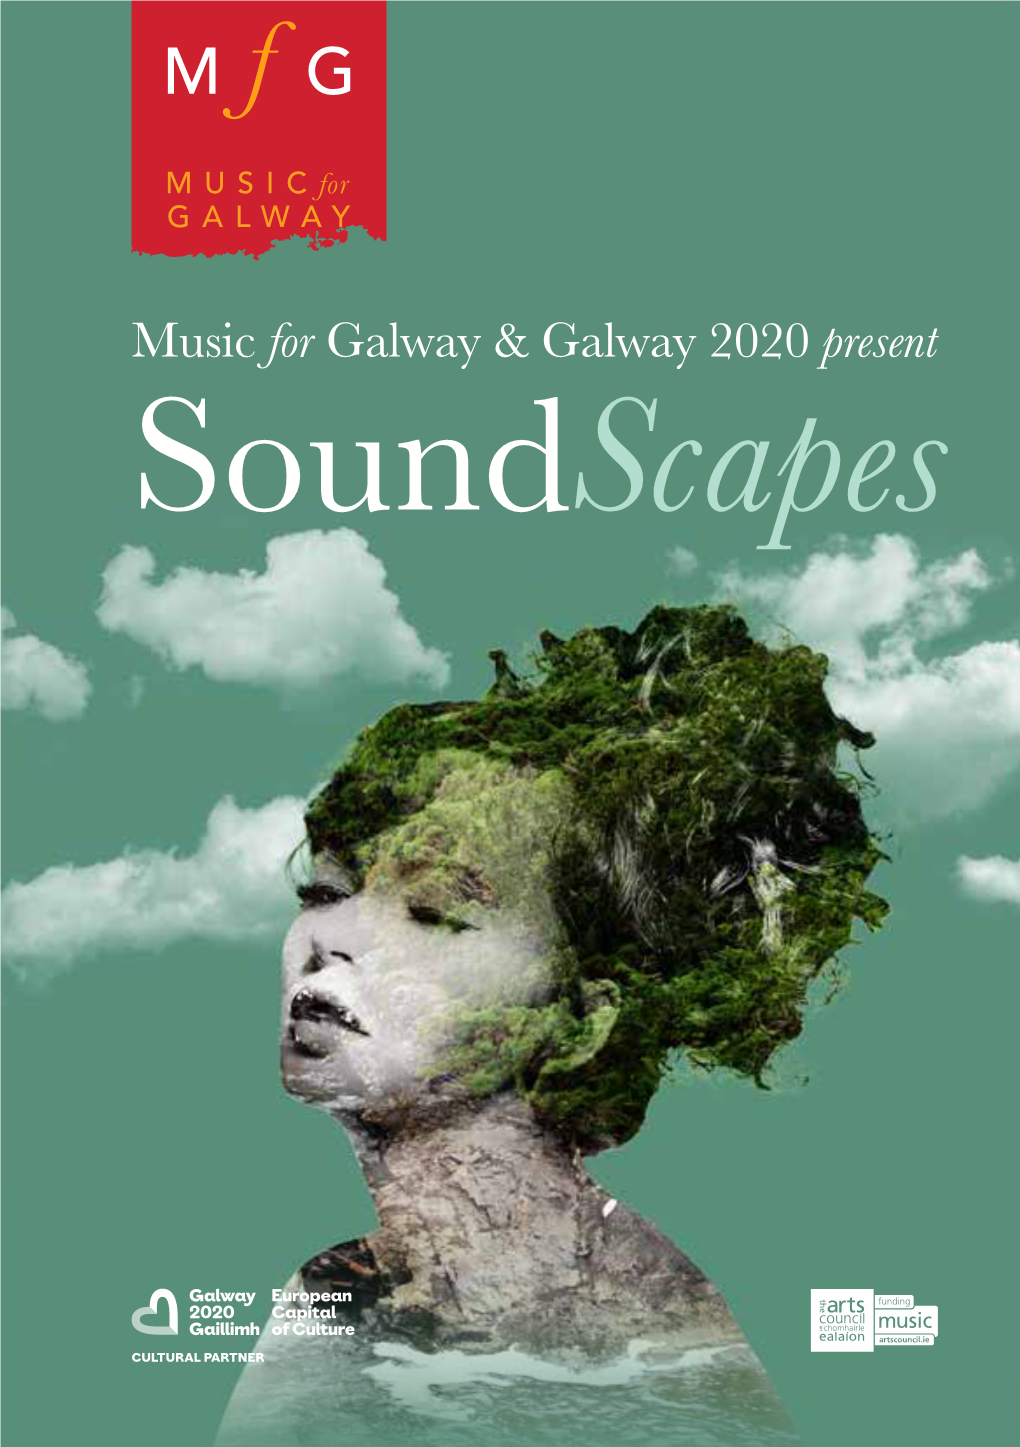 Music for Galway & Galway 2020 Present